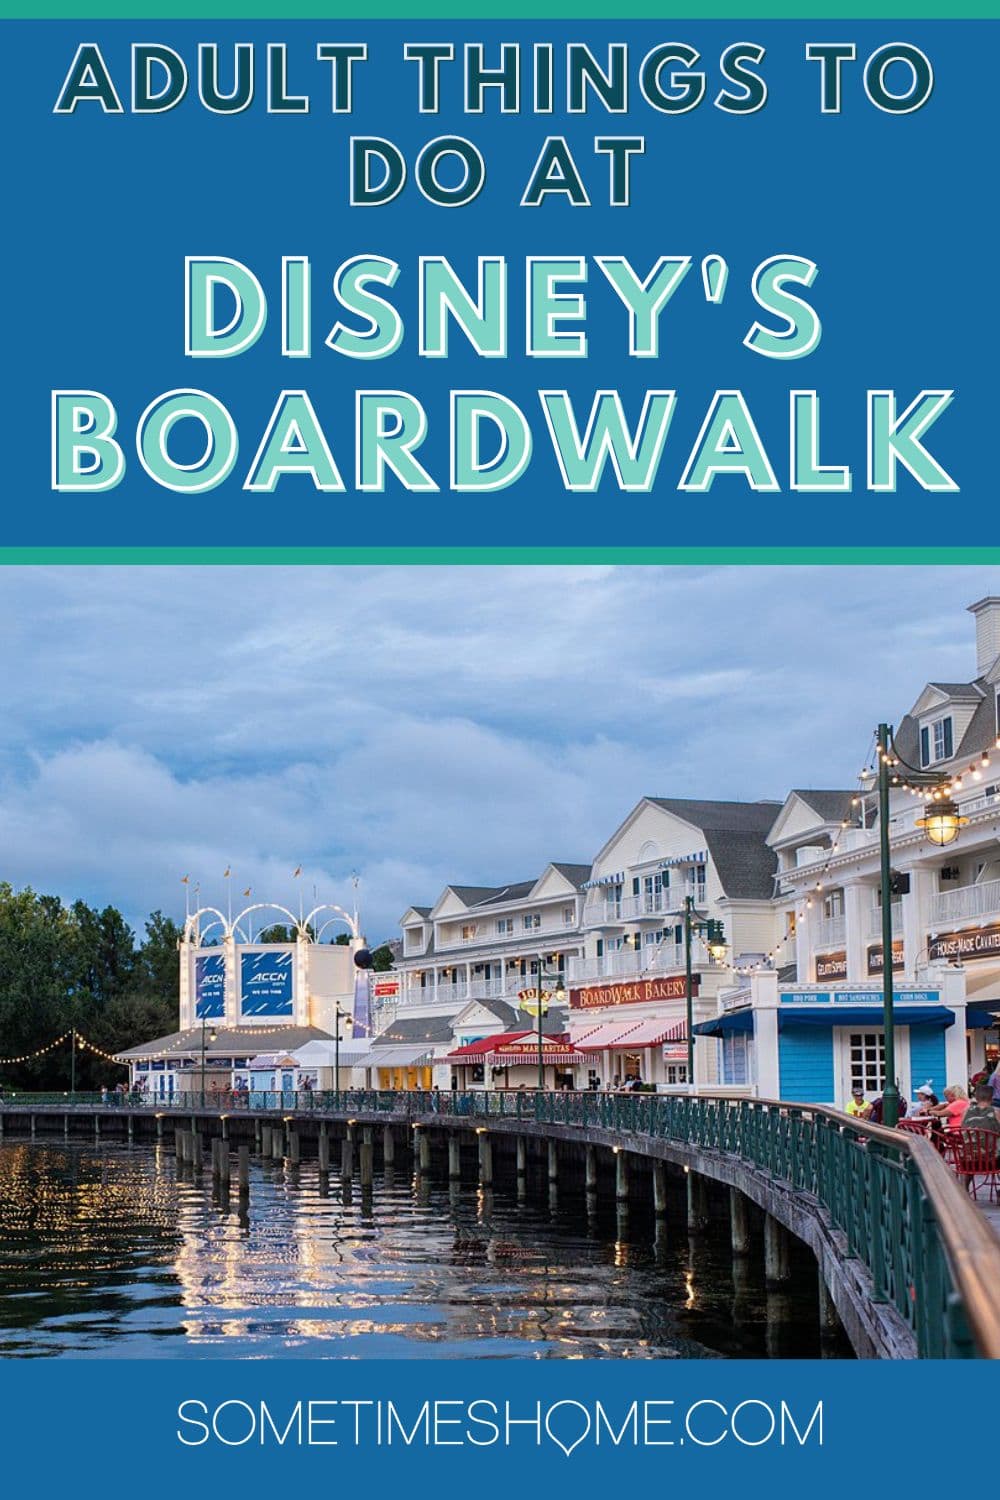 Adult Things to Do on Disney's Boardwalk with a picture of the BoardWalk at dusk.